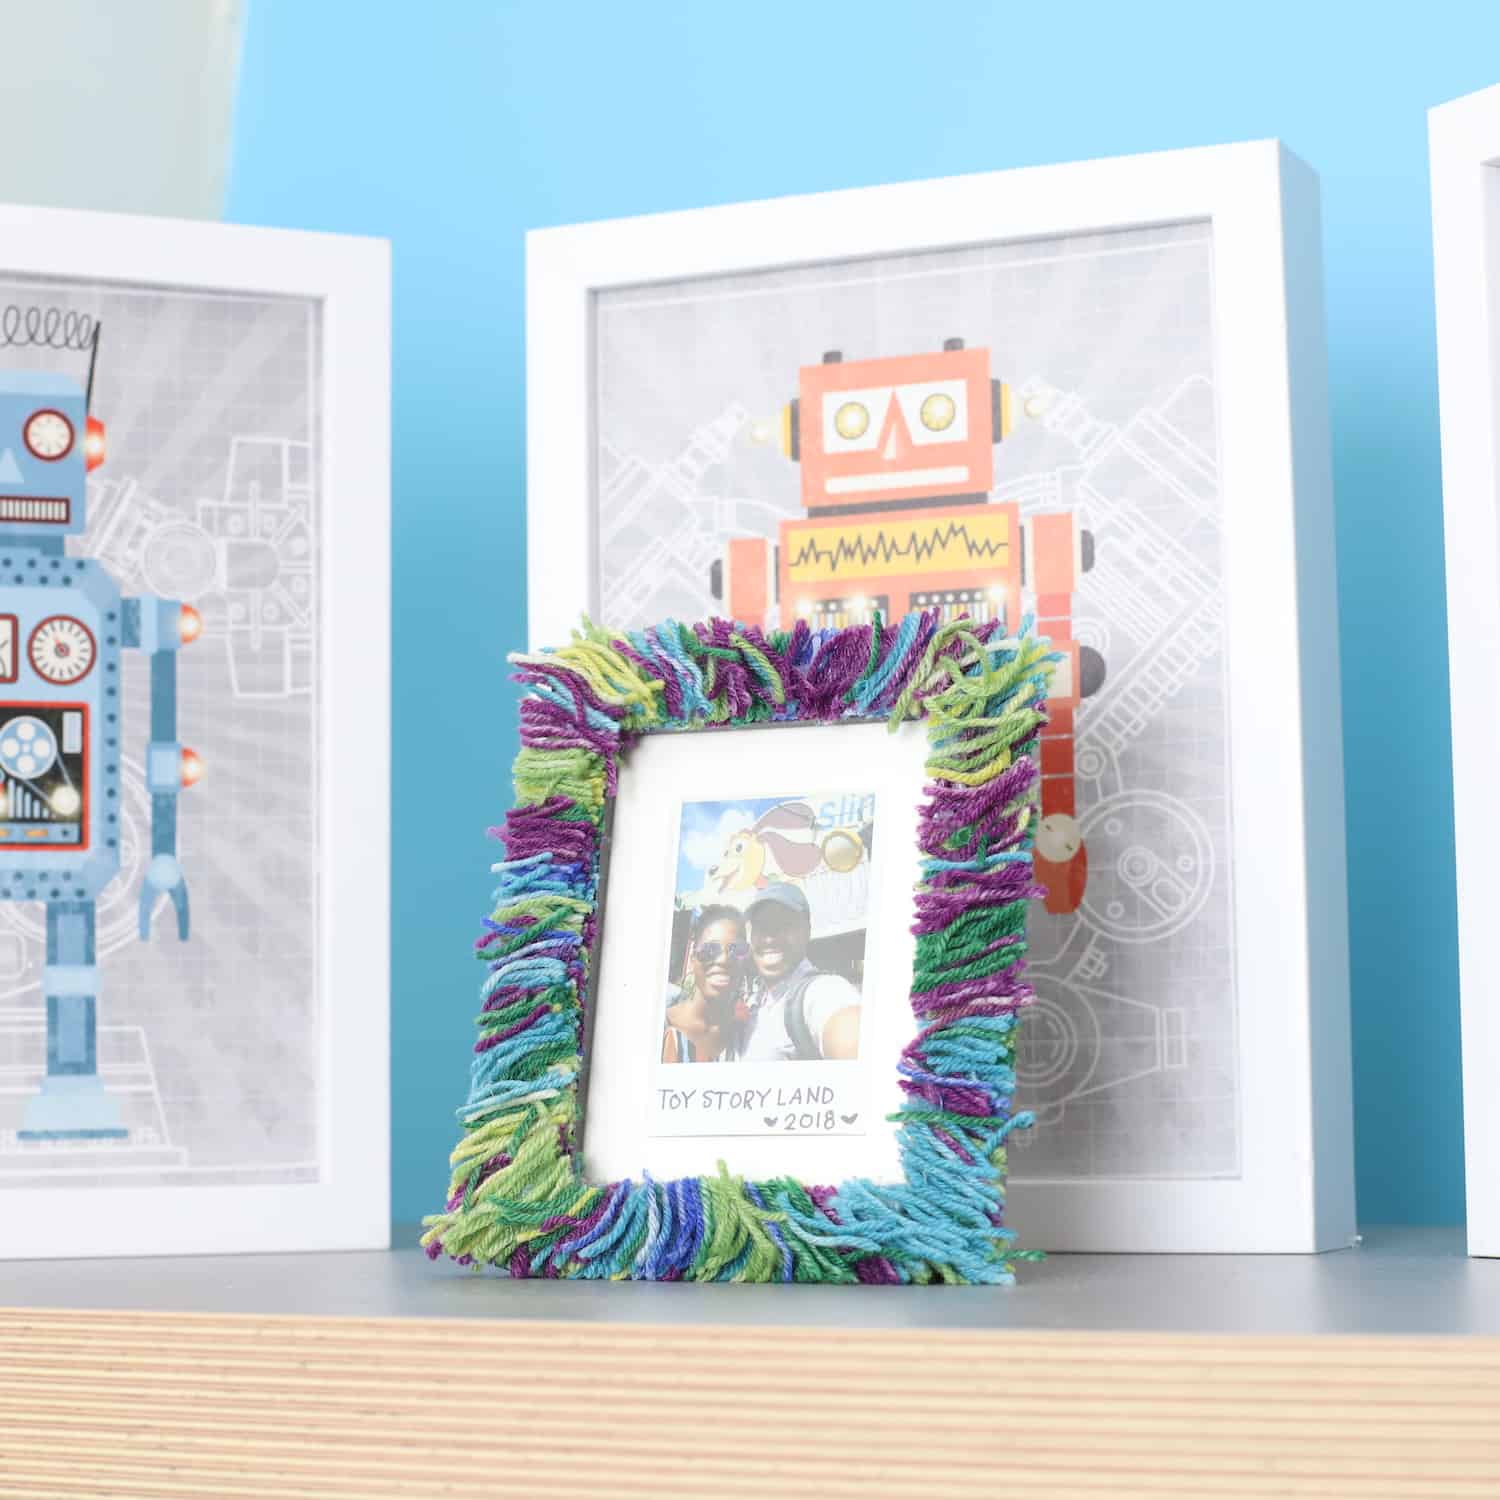 How to create a fringe picture frame with Danielle Webb #cloverusa @sprinklesofzeal #fringe #yarnprojects #threadcutter #pictureframe 